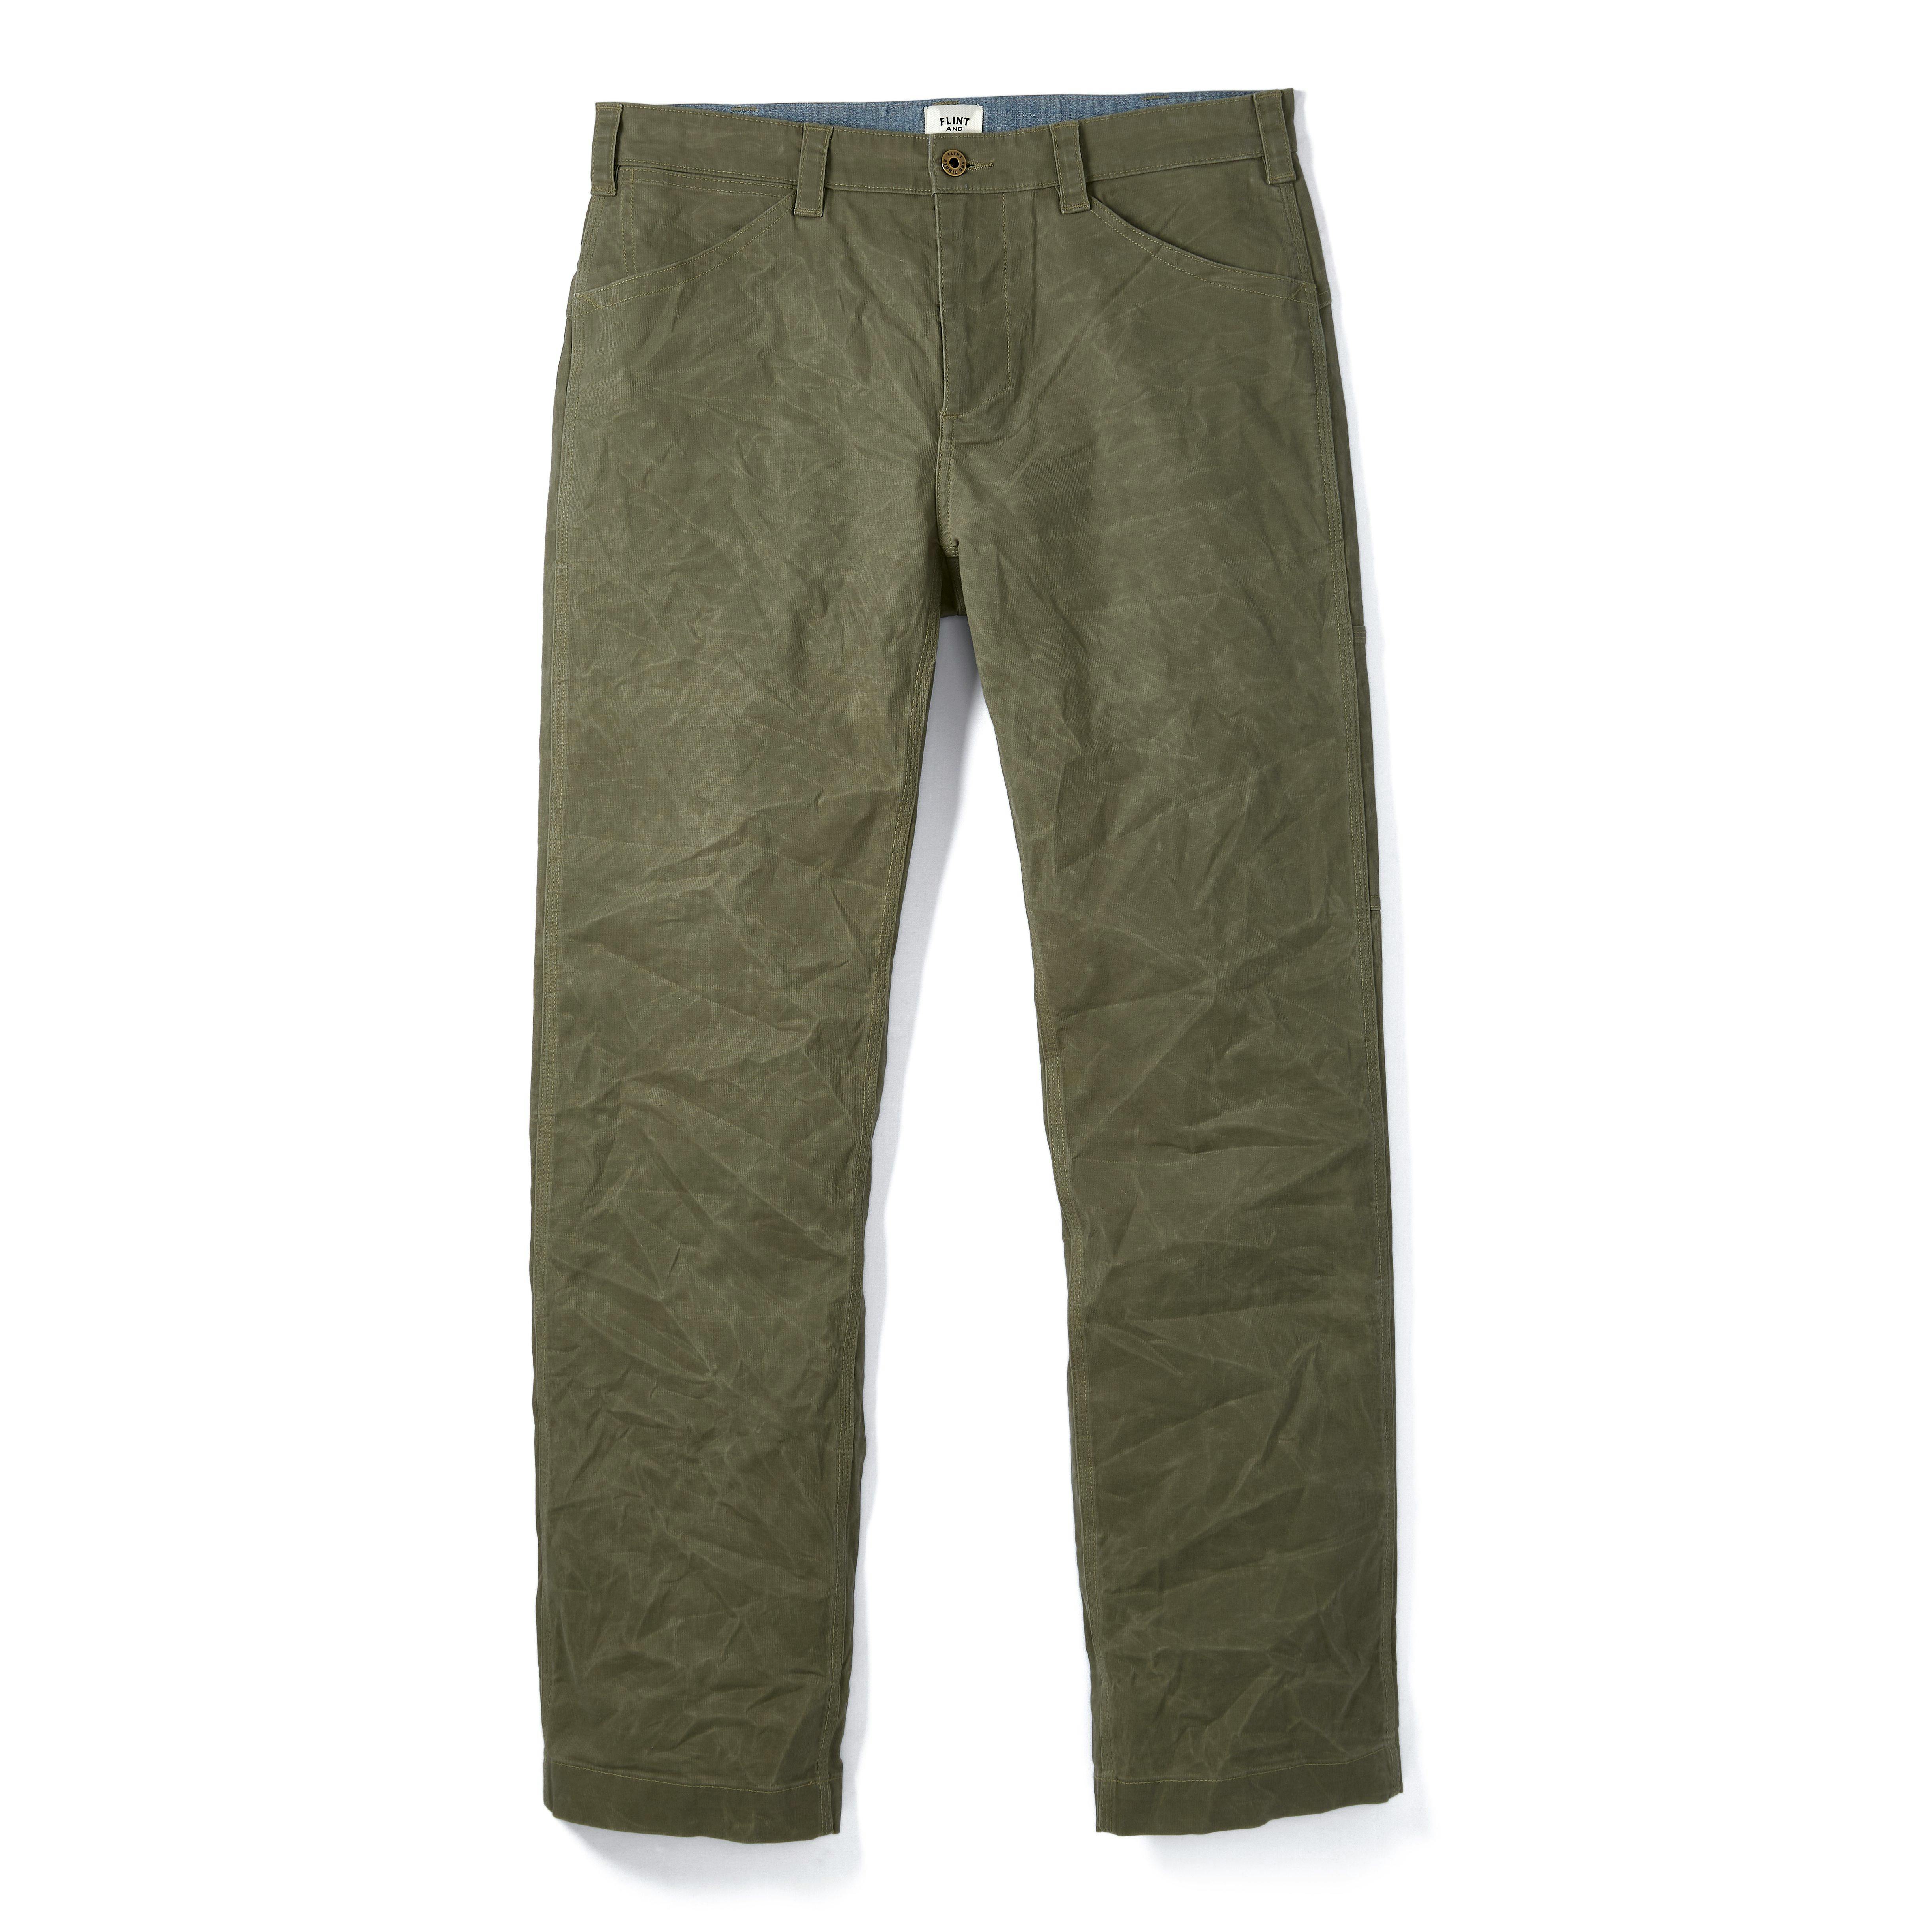 Bedford Cord Waxed Work Pant